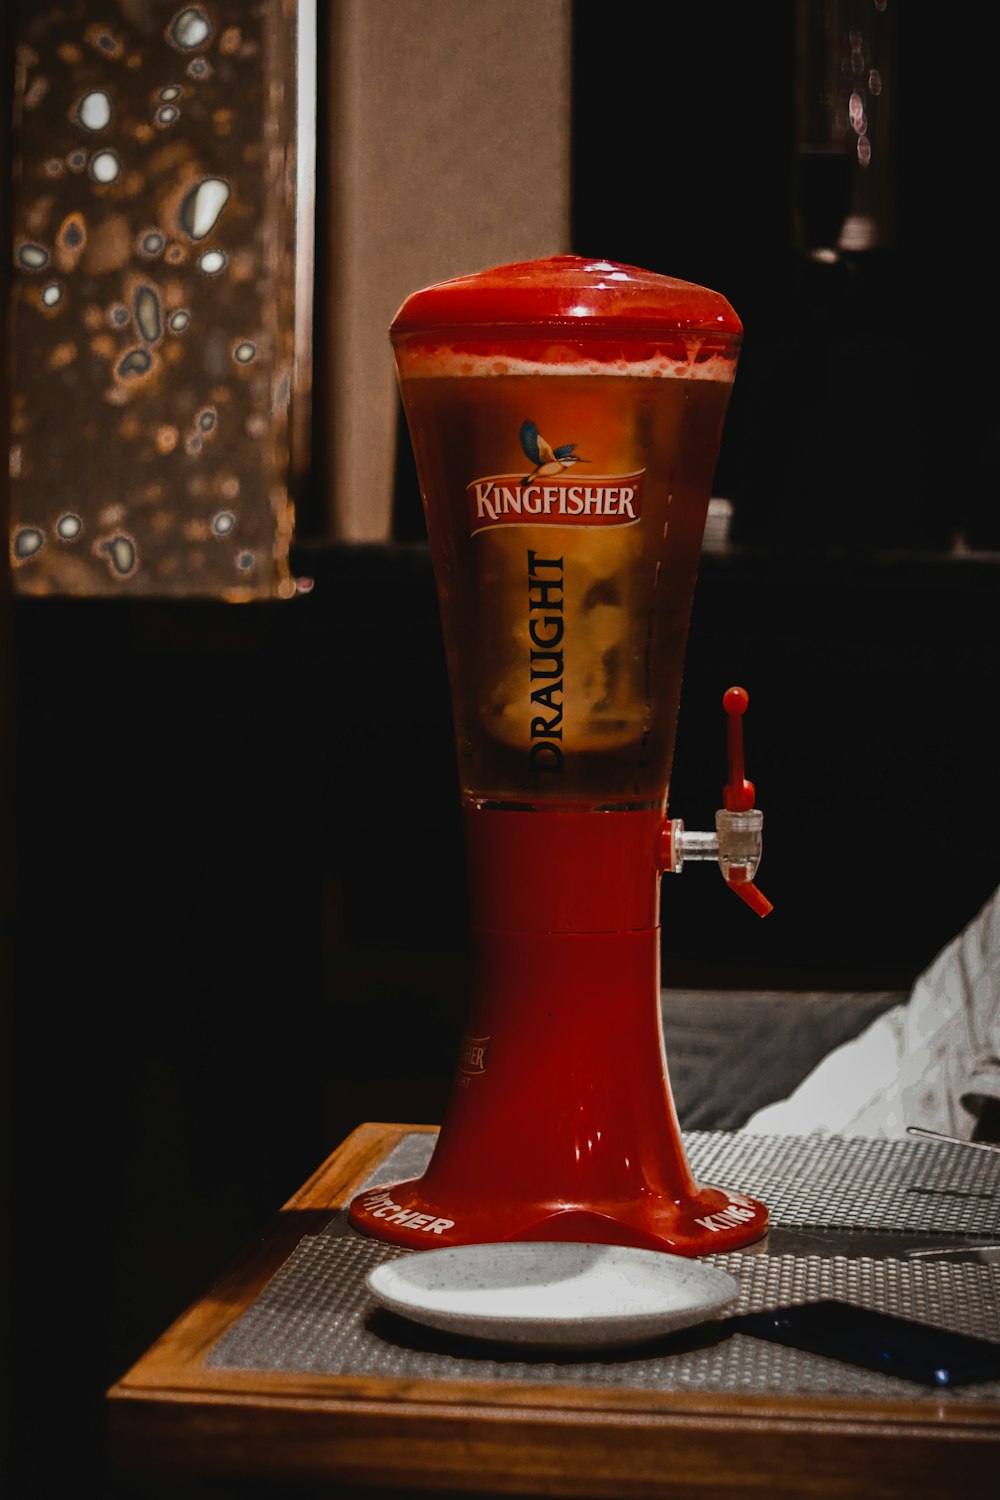 Kingfisher draught dispenser on table photo – Free Beer Image on ...